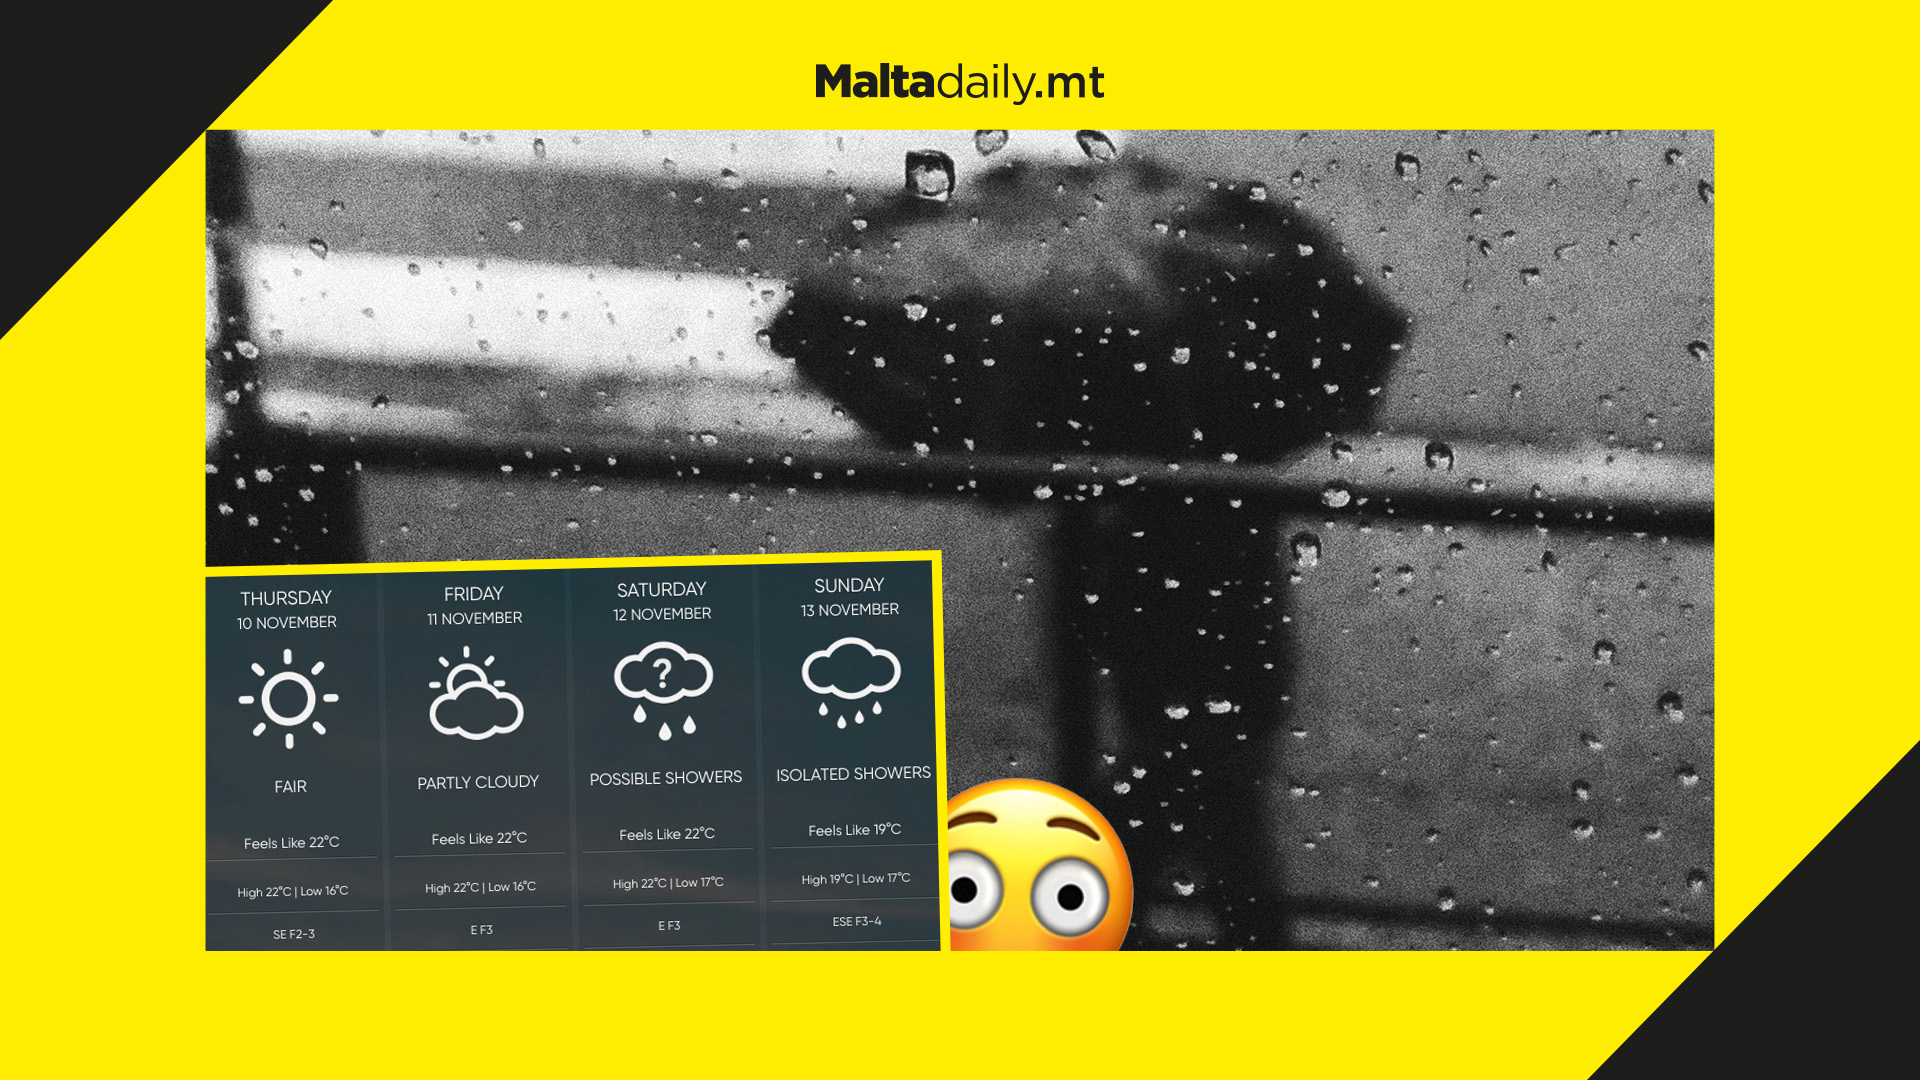 Malta in for another stormy weekend with temperatures as low as 15°C